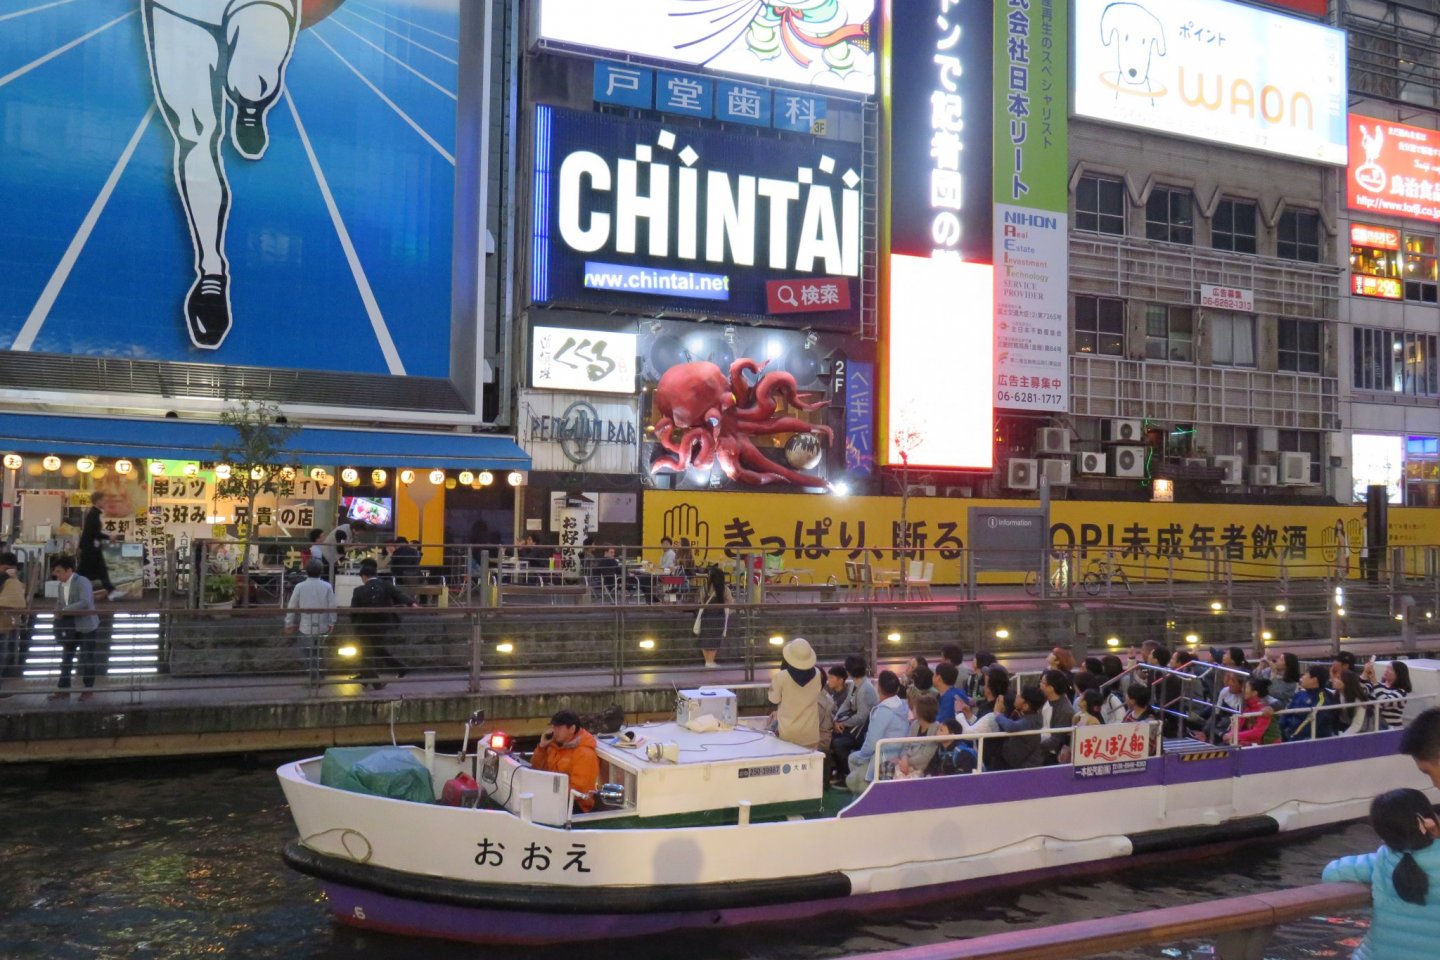 The sports bar is just a short walk from the nightlife capital of Osaka